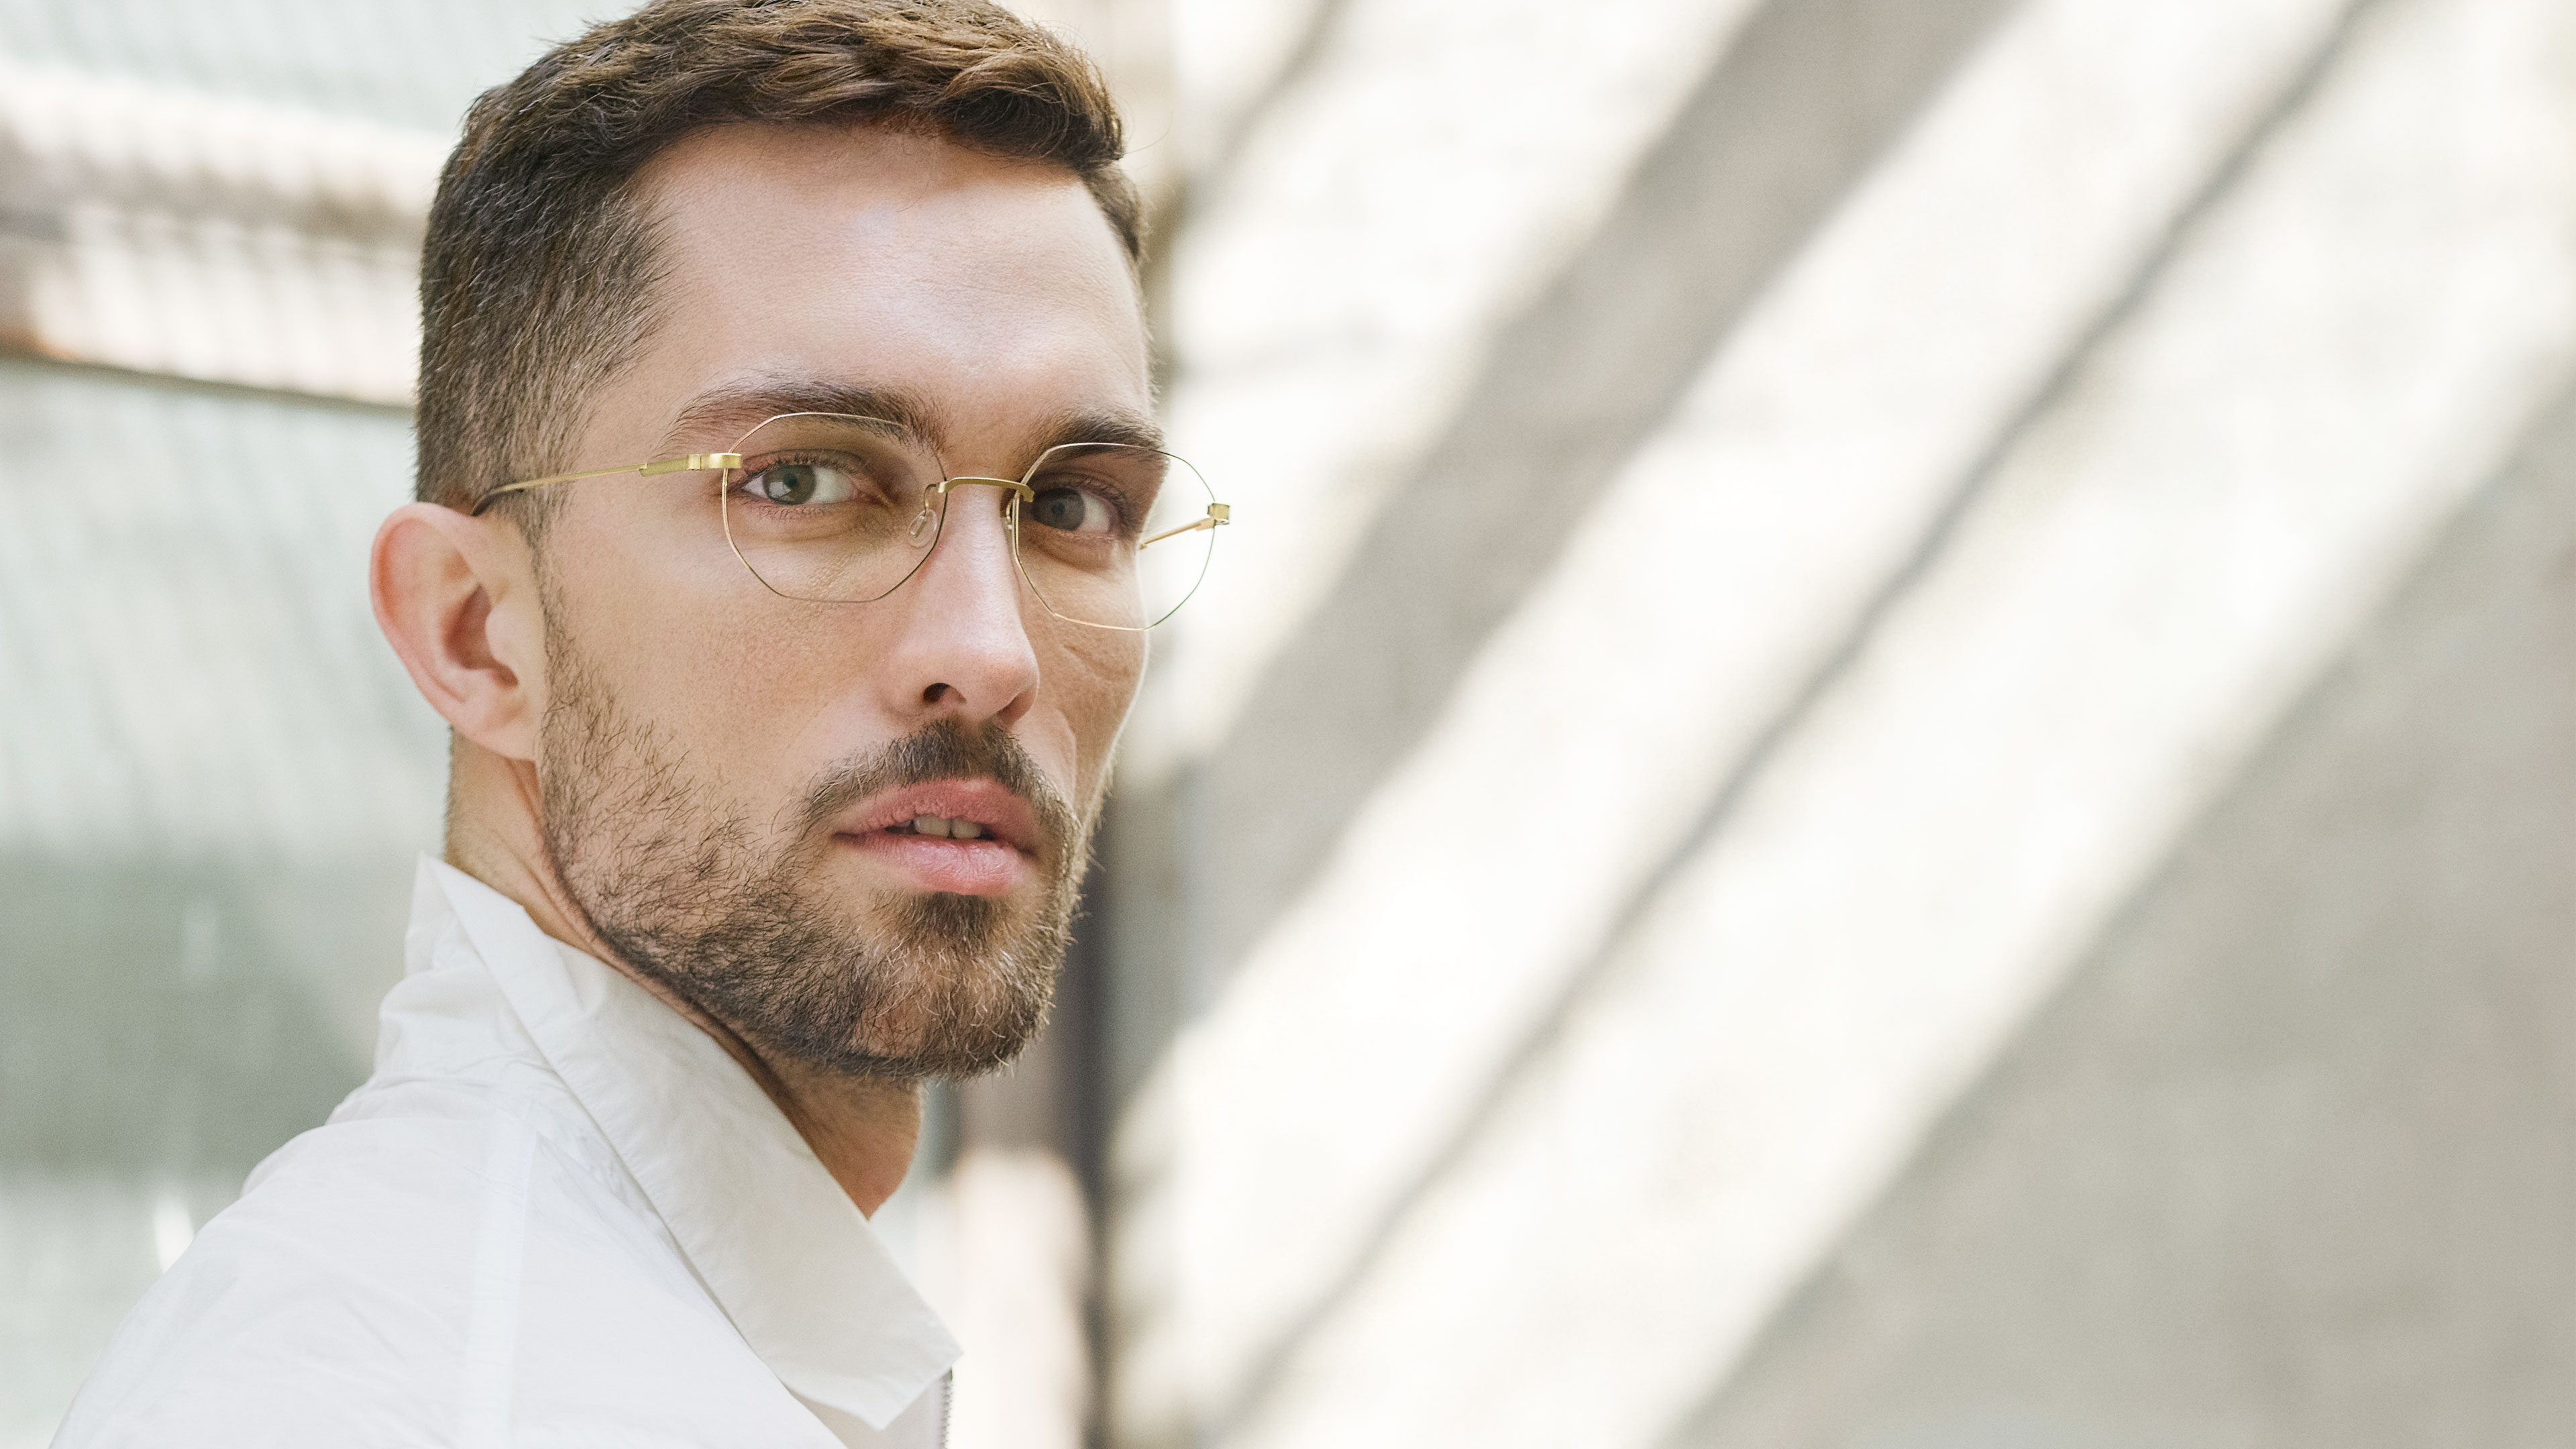 LINDBERG strip3p model 2399 rimless glasses featuring a men’s square shape in a gold colour